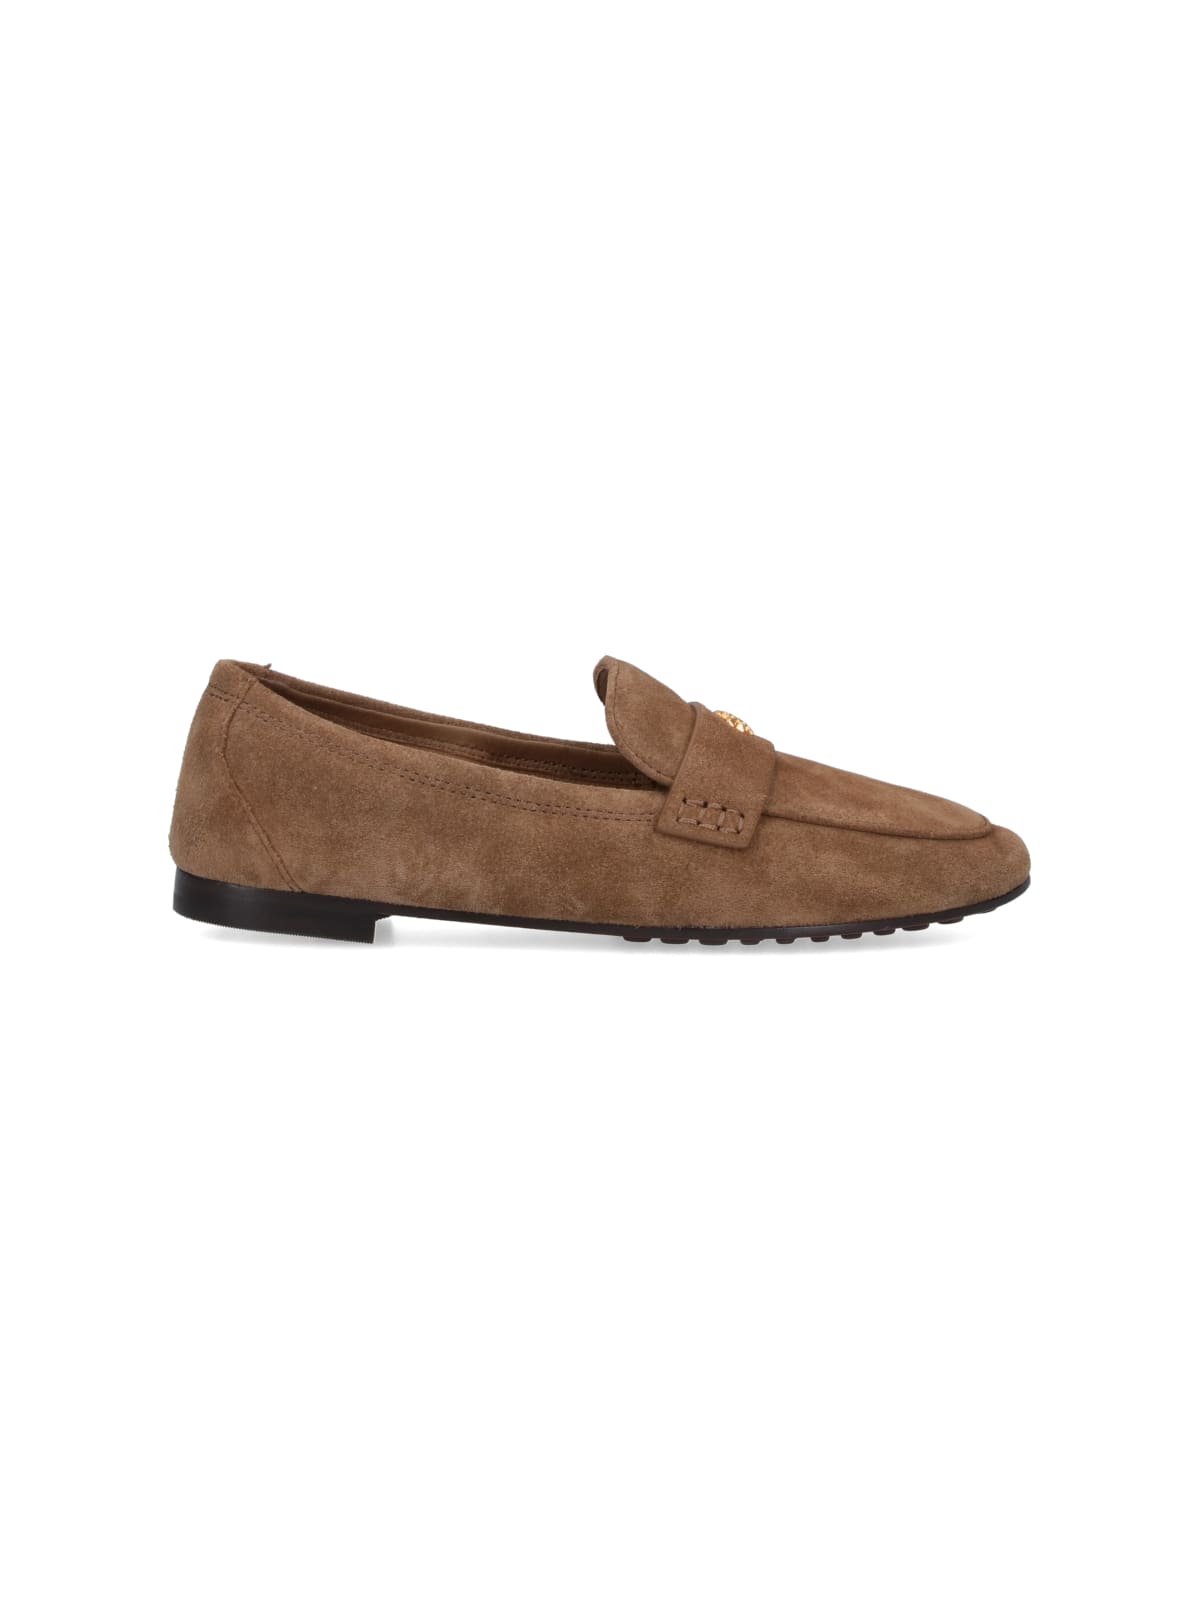 Shop Tory Burch Ballet Flats Loafers In Brown